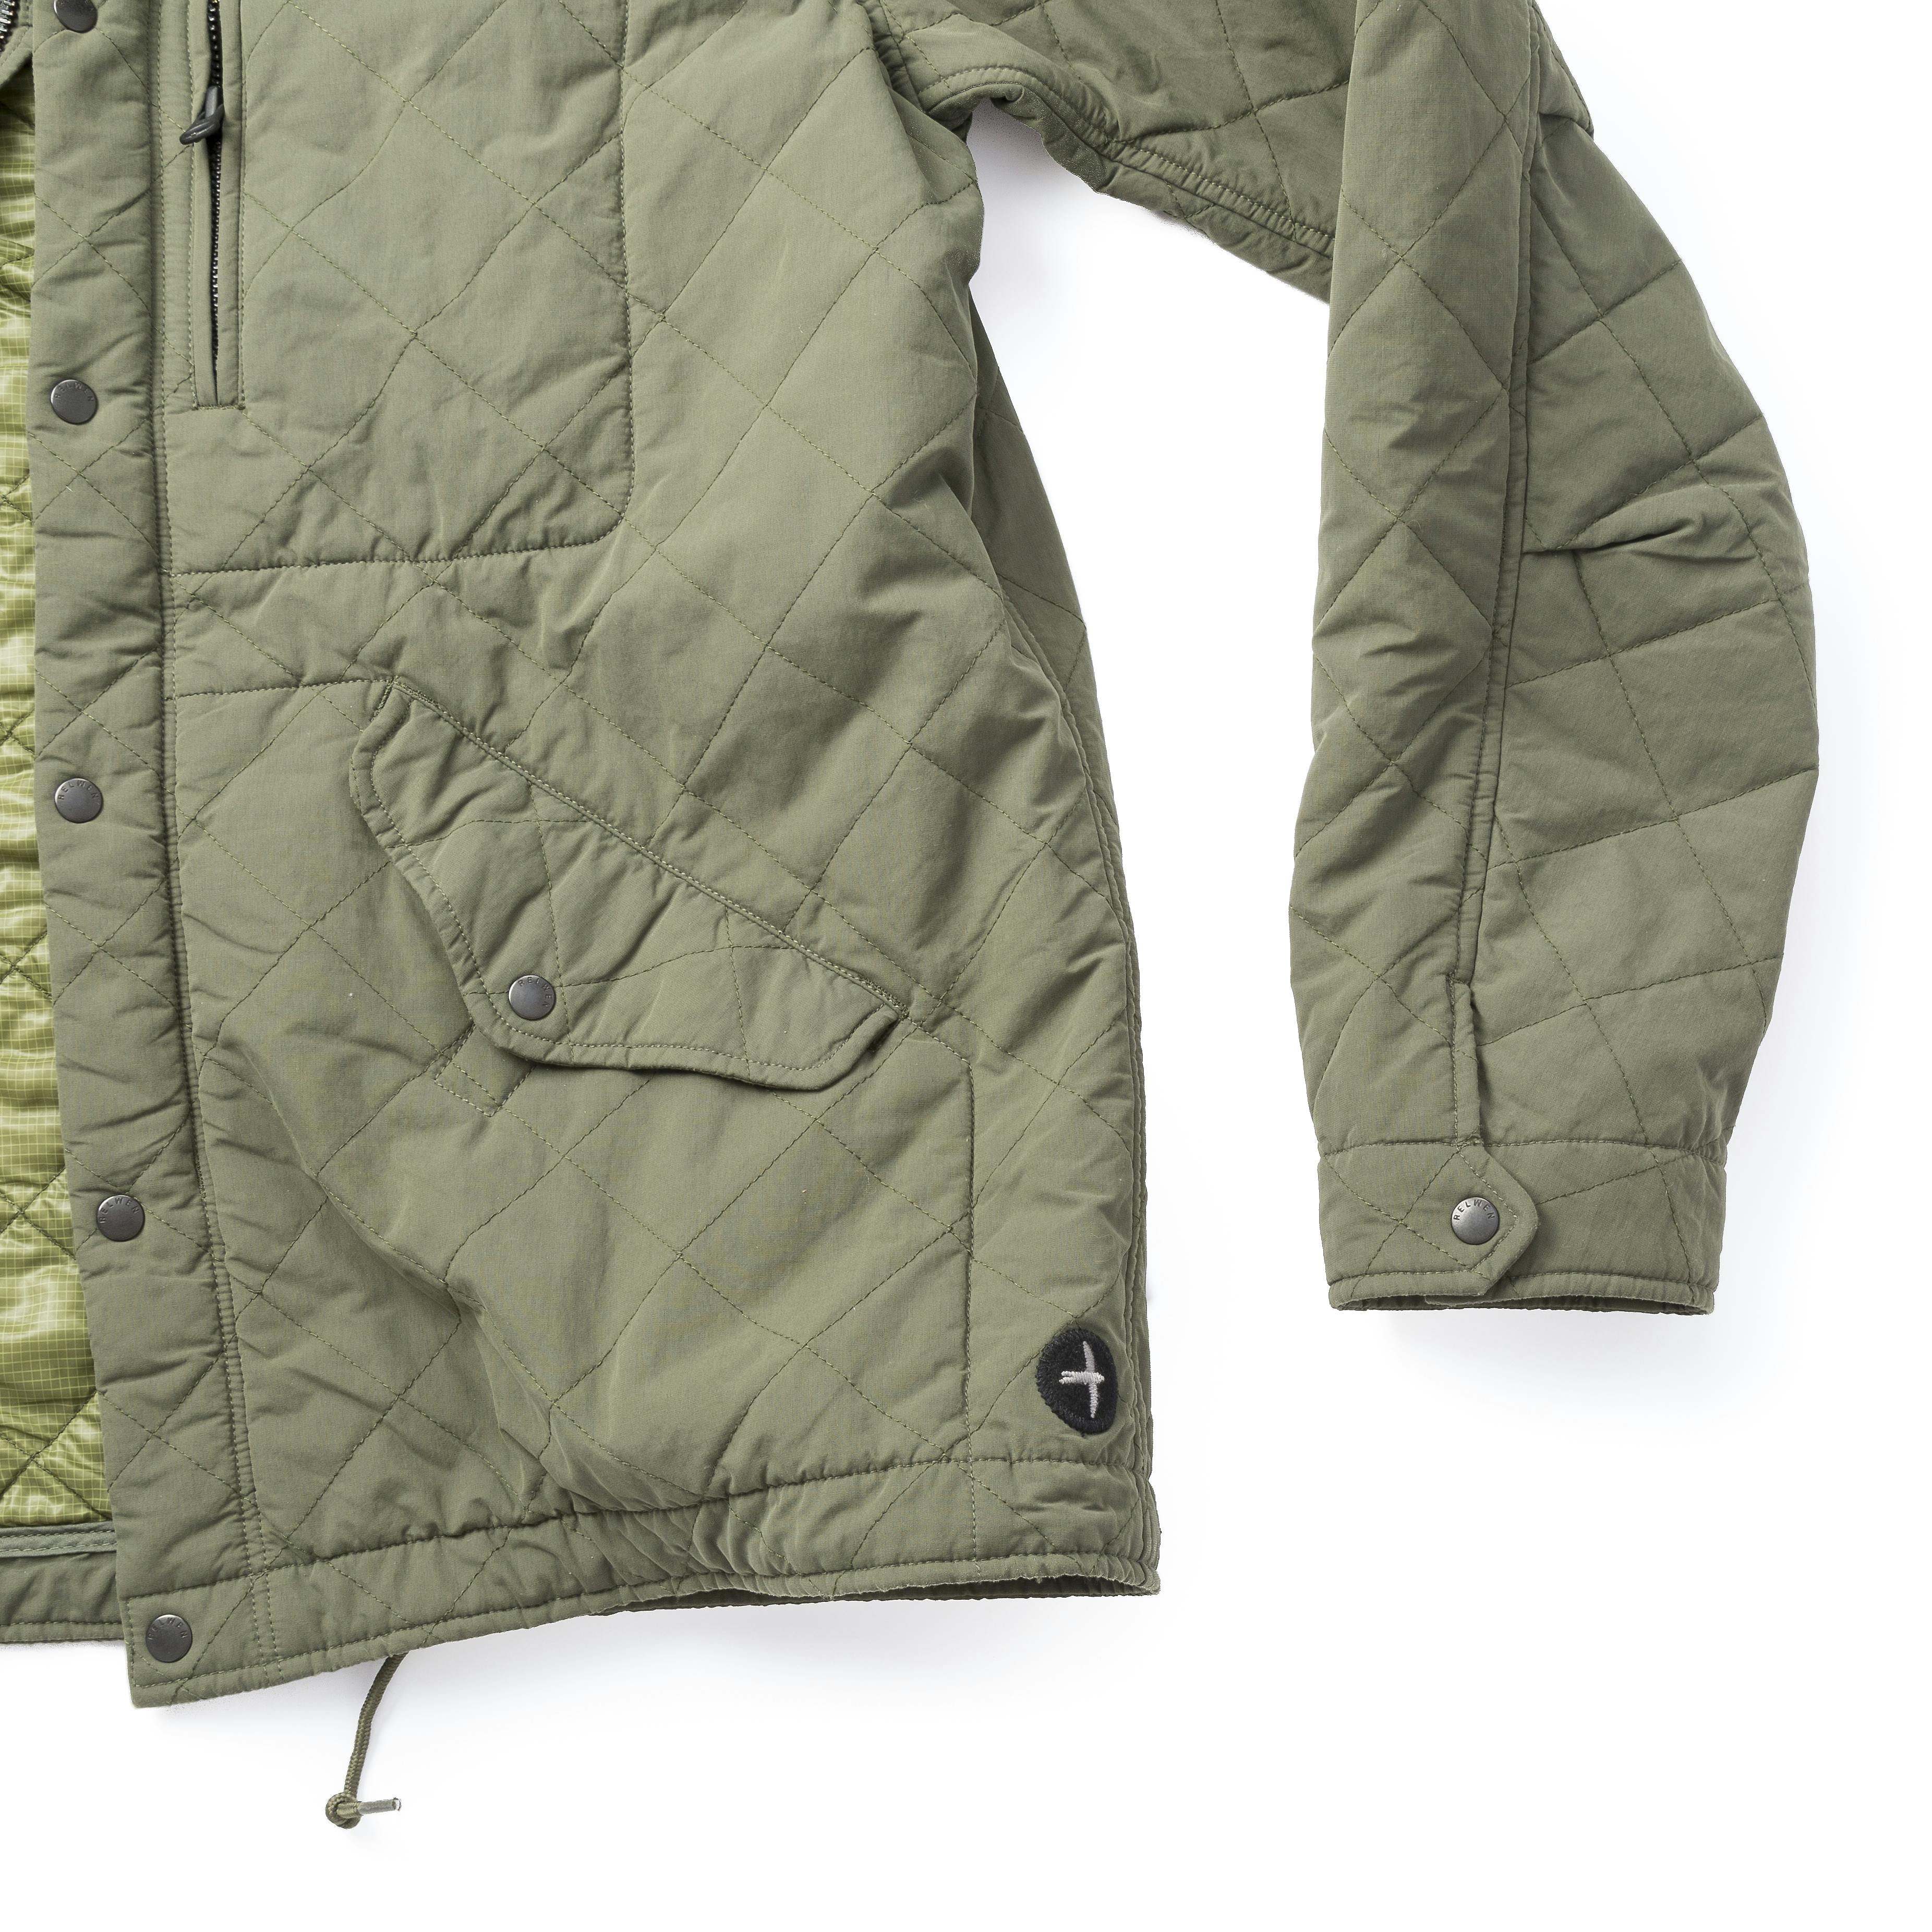 Relwen Quilted Patrol Jacket - Exclusive